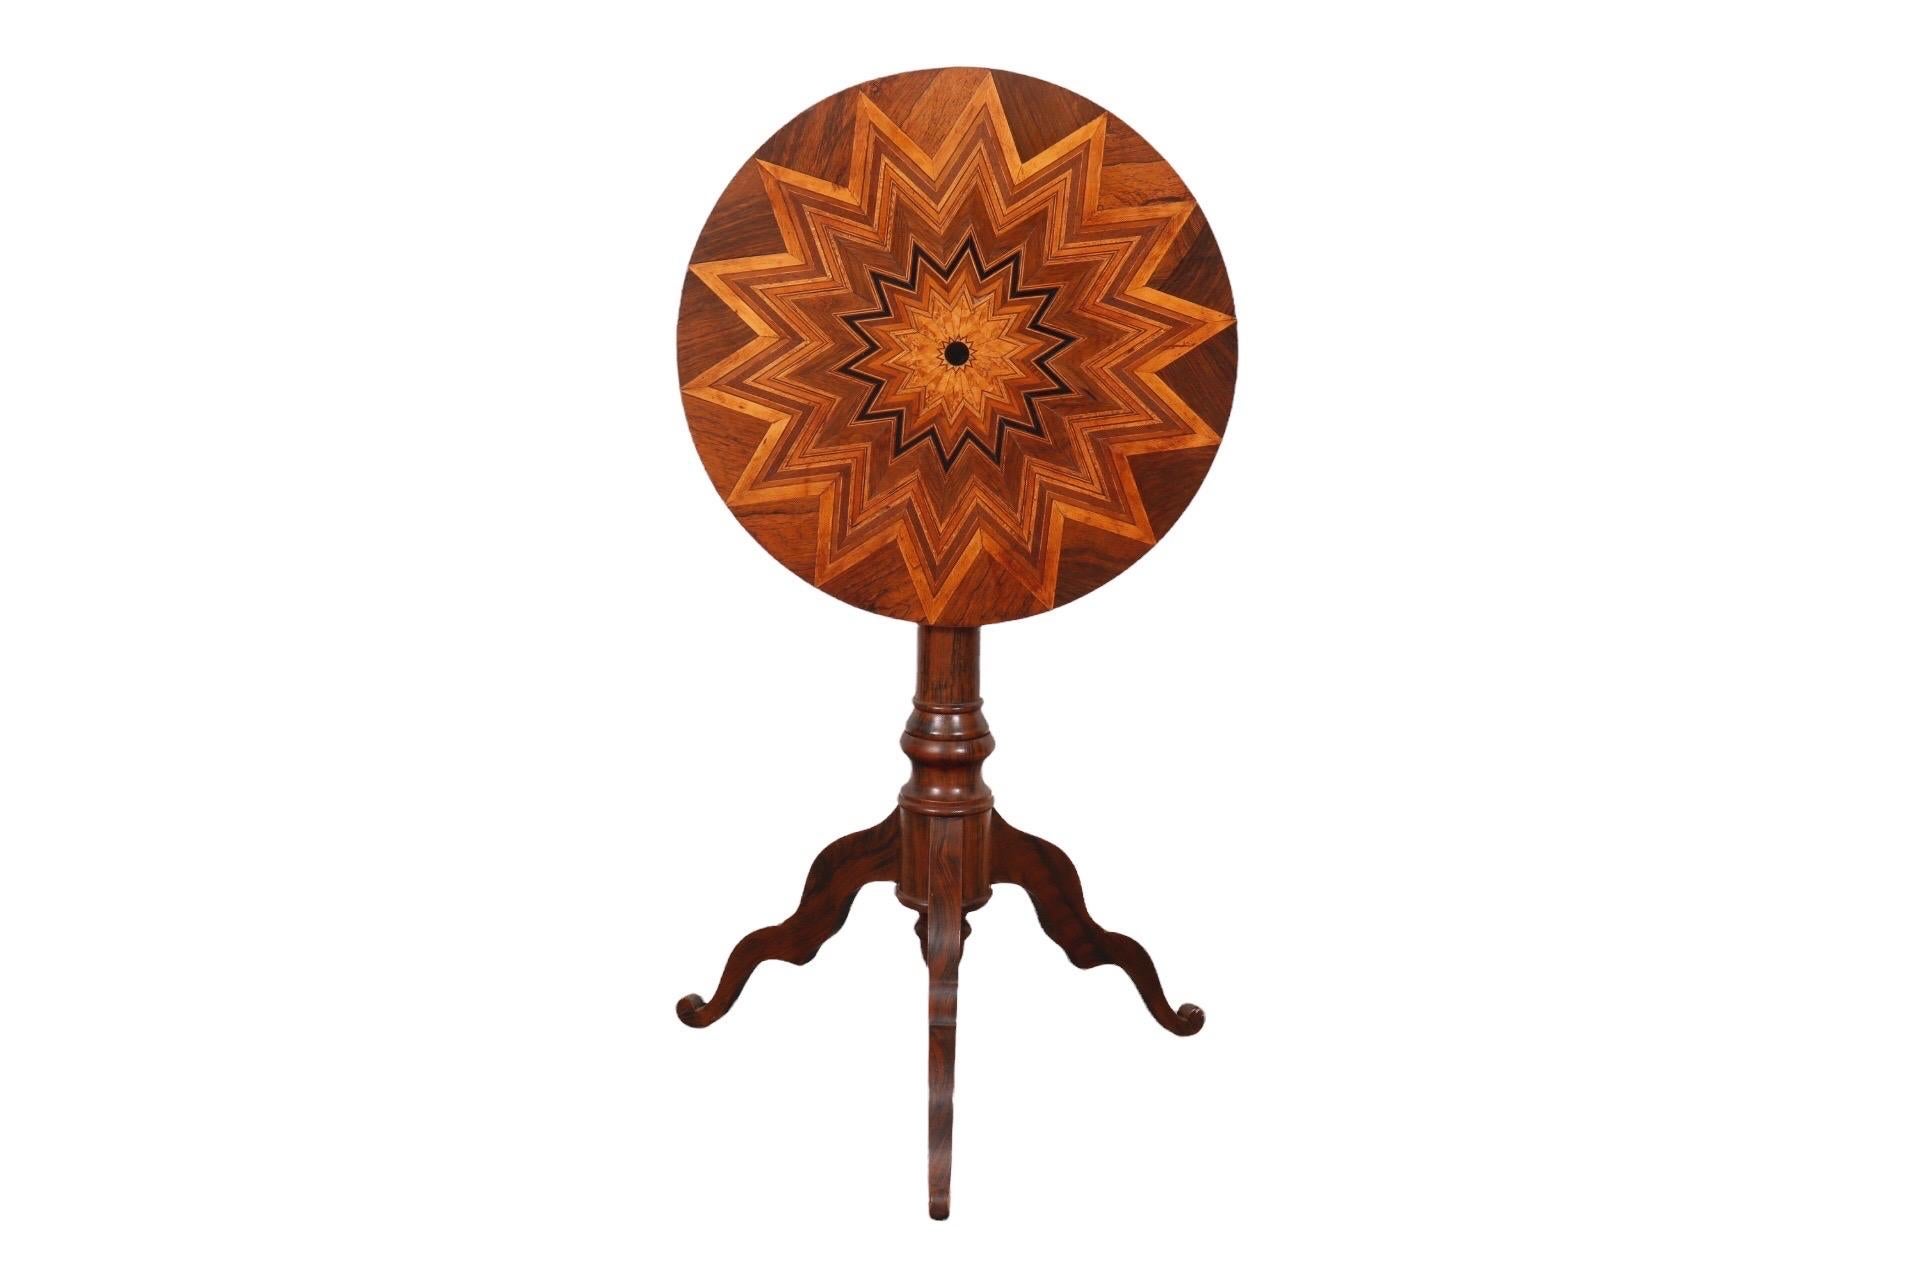 A round fruitwood tilt top occasional table. The top is inlaid with a parquetry sunburst design in rose wood, ebony and maple veneers. The tilt mechanism is cast iron and no longer has the pin to adjust the height of the table top. The base consists